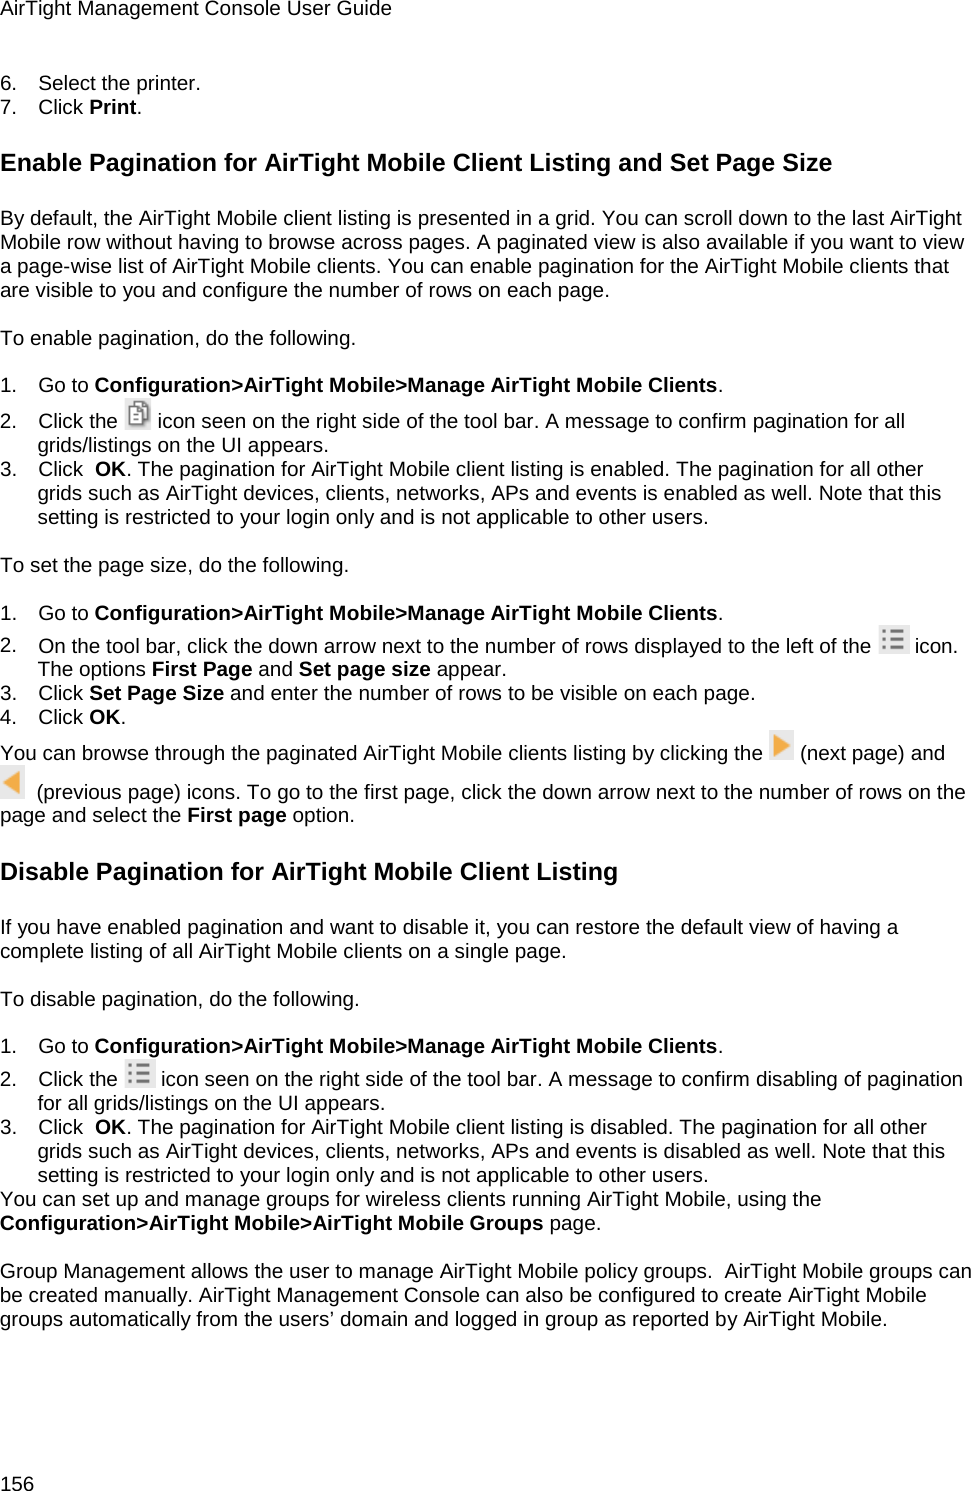 AirTight Management Console User Guide 156 6.      Select the printer. 7.      Click Print.  Enable Pagination for AirTight Mobile Client Listing and Set Page Size By default, the AirTight Mobile client listing is presented in a grid. You can scroll down to the last AirTight Mobile row without having to browse across pages. A paginated view is also available if you want to view a page-wise list of AirTight Mobile clients. You can enable pagination for the AirTight Mobile clients that are visible to you and configure the number of rows on each page.    To enable pagination, do the following.   1.      Go to Configuration&gt;AirTight Mobile&gt;Manage AirTight Mobile Clients. 2.      Click the   icon seen on the right side of the tool bar. A message to confirm pagination for all grids/listings on the UI appears. 3.      Click  OK. The pagination for AirTight Mobile client listing is enabled. The pagination for all other grids such as AirTight devices, clients, networks, APs and events is enabled as well. Note that this setting is restricted to your login only and is not applicable to other users.    To set the page size, do the following.   1.      Go to Configuration&gt;AirTight Mobile&gt;Manage AirTight Mobile Clients. 2.      On the tool bar, click the down arrow next to the number of rows displayed to the left of the   icon. The options First Page and Set page size appear. 3.      Click Set Page Size and enter the number of rows to be visible on each page. 4.      Click OK. You can browse through the paginated AirTight Mobile clients listing by clicking the   (next page) and   (previous page) icons. To go to the first page, click the down arrow next to the number of rows on the page and select the First page option. Disable Pagination for AirTight Mobile Client Listing If you have enabled pagination and want to disable it, you can restore the default view of having a complete listing of all AirTight Mobile clients on a single page.   To disable pagination, do the following.   1.      Go to Configuration&gt;AirTight Mobile&gt;Manage AirTight Mobile Clients. 2.      Click the   icon seen on the right side of the tool bar. A message to confirm disabling of pagination for all grids/listings on the UI appears. 3.      Click  OK. The pagination for AirTight Mobile client listing is disabled. The pagination for all other grids such as AirTight devices, clients, networks, APs and events is disabled as well. Note that this setting is restricted to your login only and is not applicable to other users. You can set up and manage groups for wireless clients running AirTight Mobile, using the Configuration&gt;AirTight Mobile&gt;AirTight Mobile Groups page.   Group Management allows the user to manage AirTight Mobile policy groups.  AirTight Mobile groups can be created manually. AirTight Management Console can also be configured to create AirTight Mobile groups automatically from the users’ domain and logged in group as reported by AirTight Mobile.   